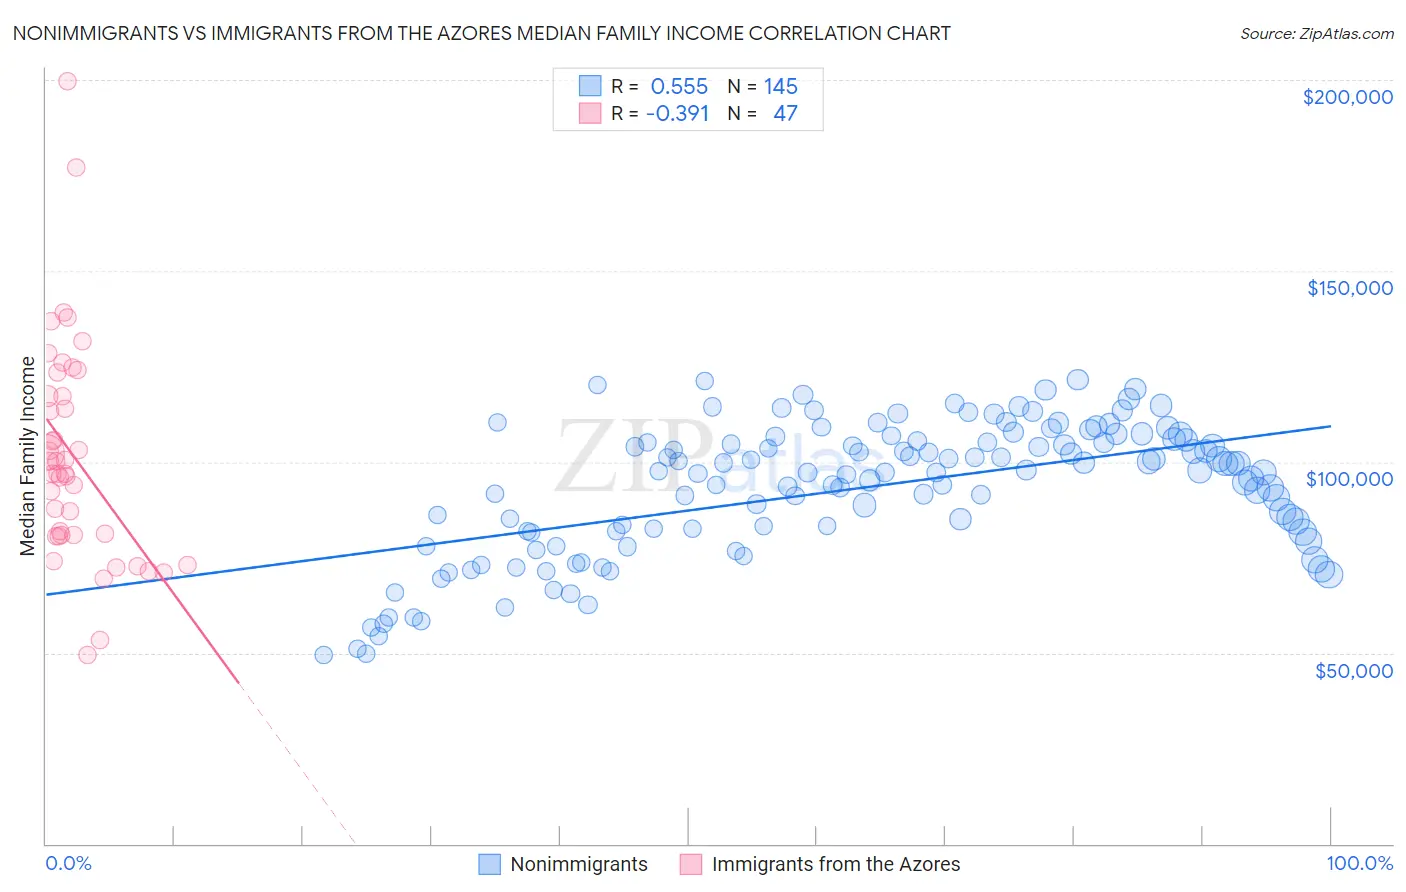 Nonimmigrants vs Immigrants from the Azores Median Family Income